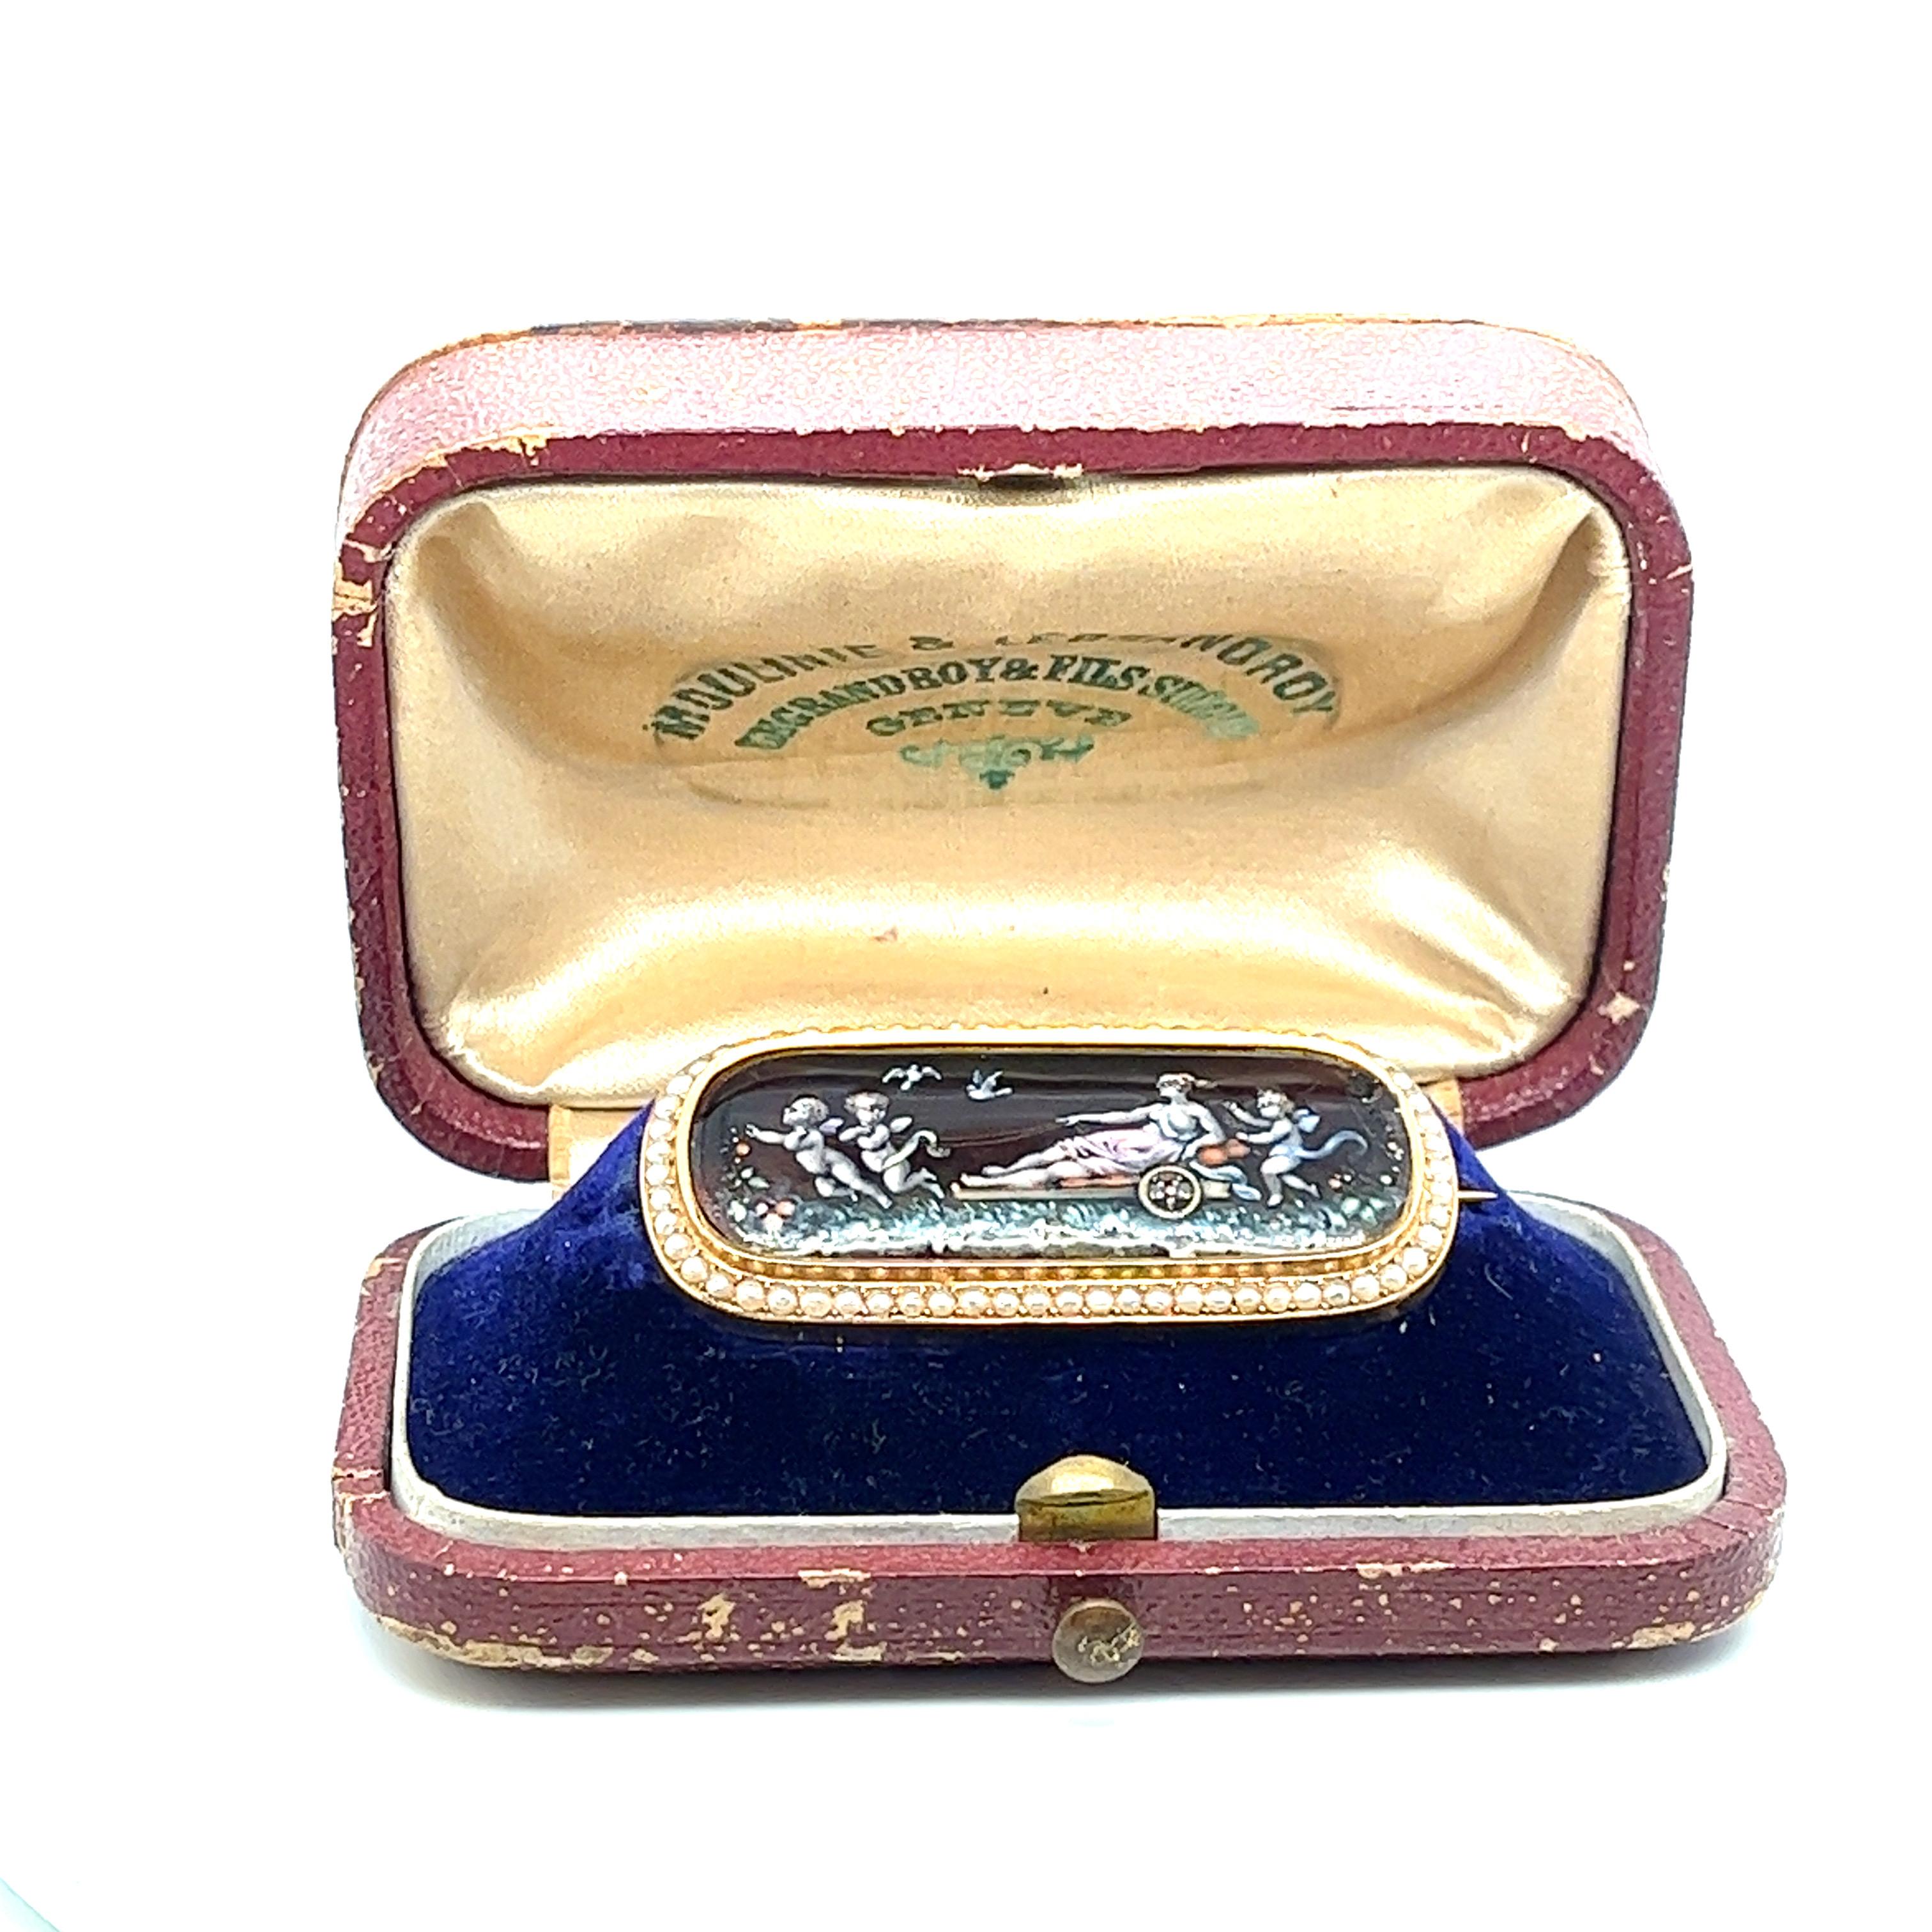 Antique Circa 1850 14K Gold Brooch with Enamel Painting - Triumph of Love - Moulinie & Legrandroy, Geneve

Description:

Overview:
Discover a true Victorian treasure with this circa 1850 14K gold brooch, featuring a captivating enamel painting